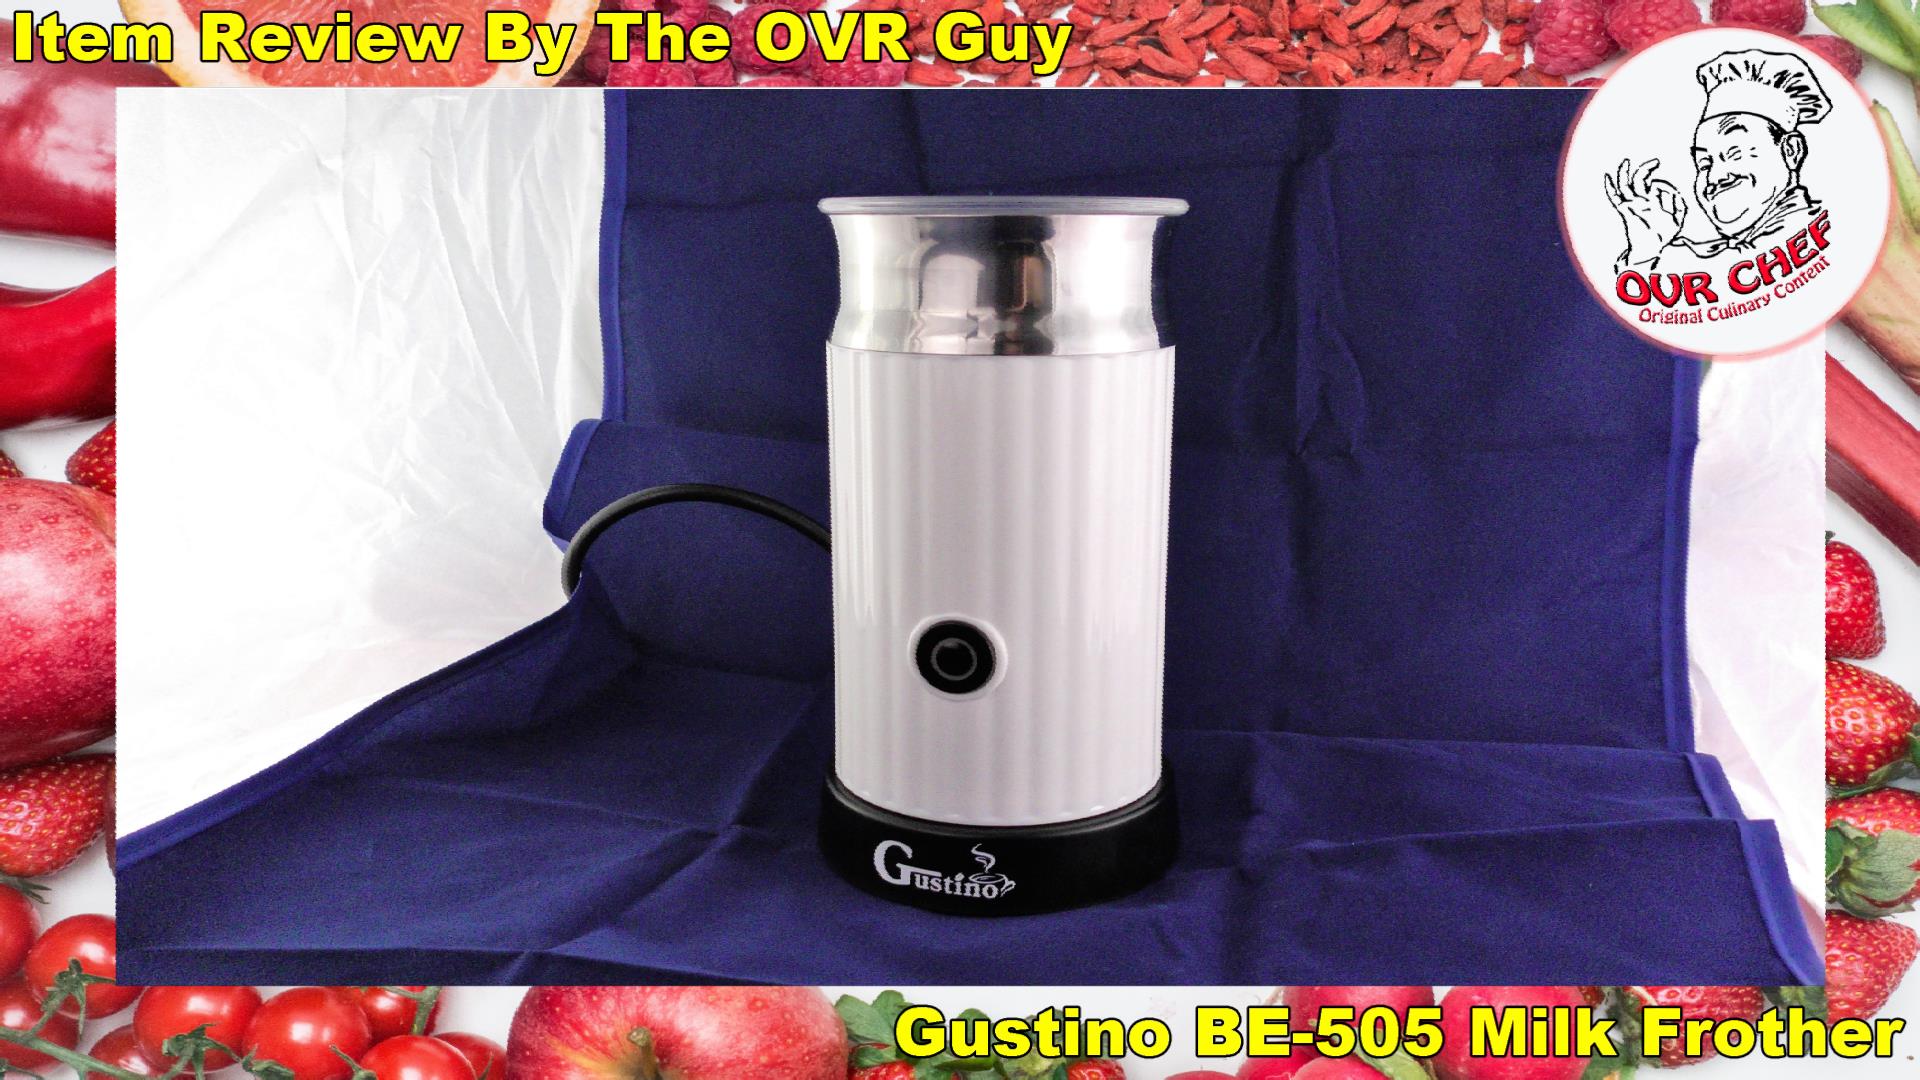 https://originalvideoreviews.com/wp-content/uploads/2018/11/Item-review-Gustino-BE-505-Milk-Frother-Thumbnail-Text.jpg